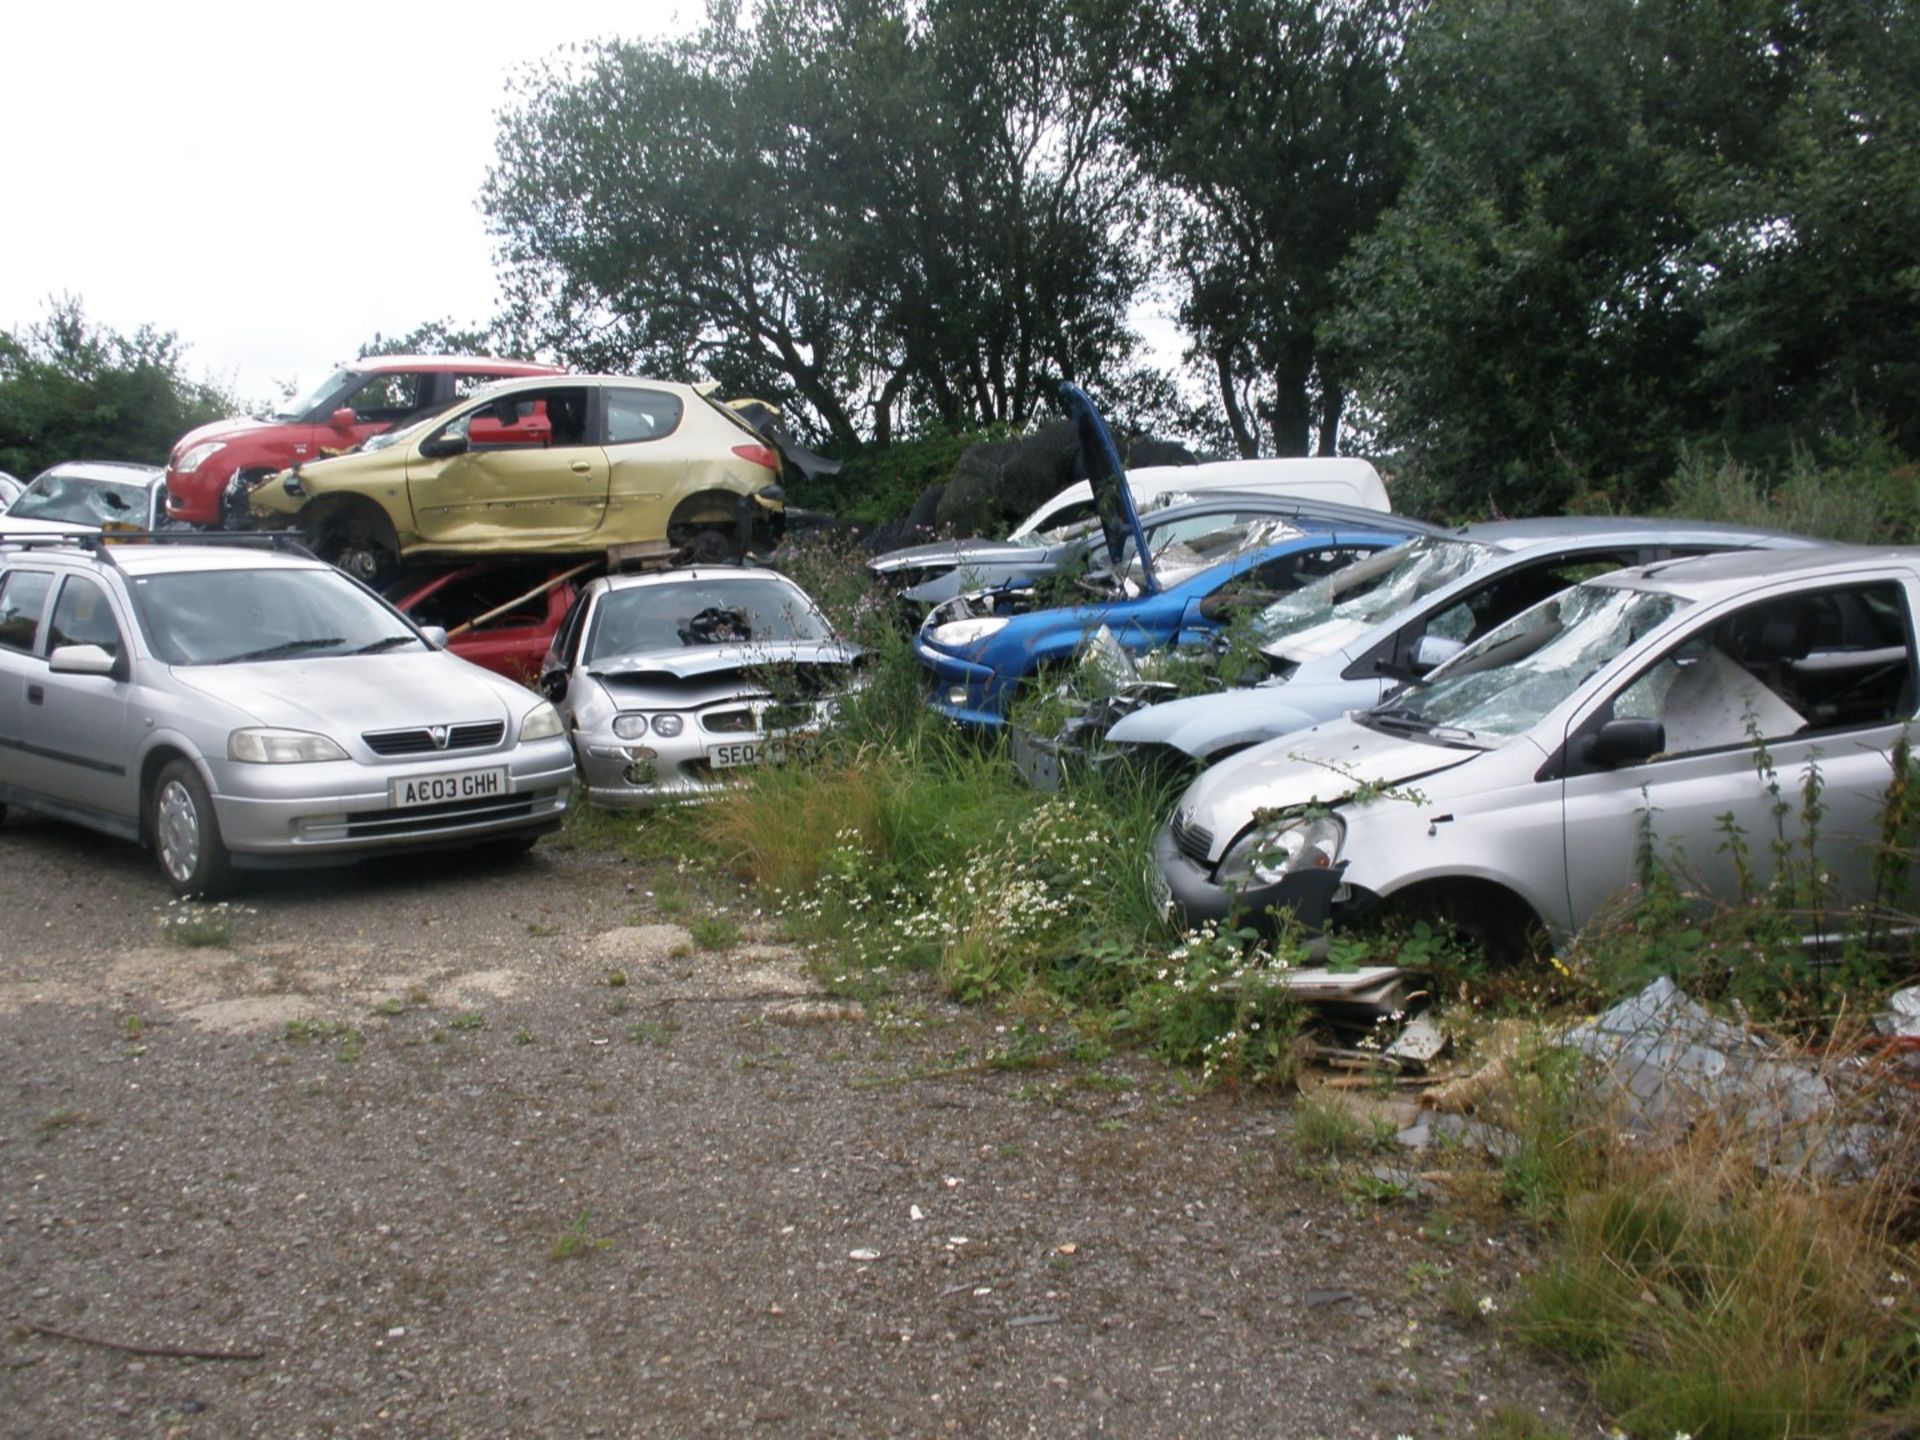 The Residual Scrap Vehicles on site together with other scrap hidden in the undergrowth. To include - Image 8 of 10